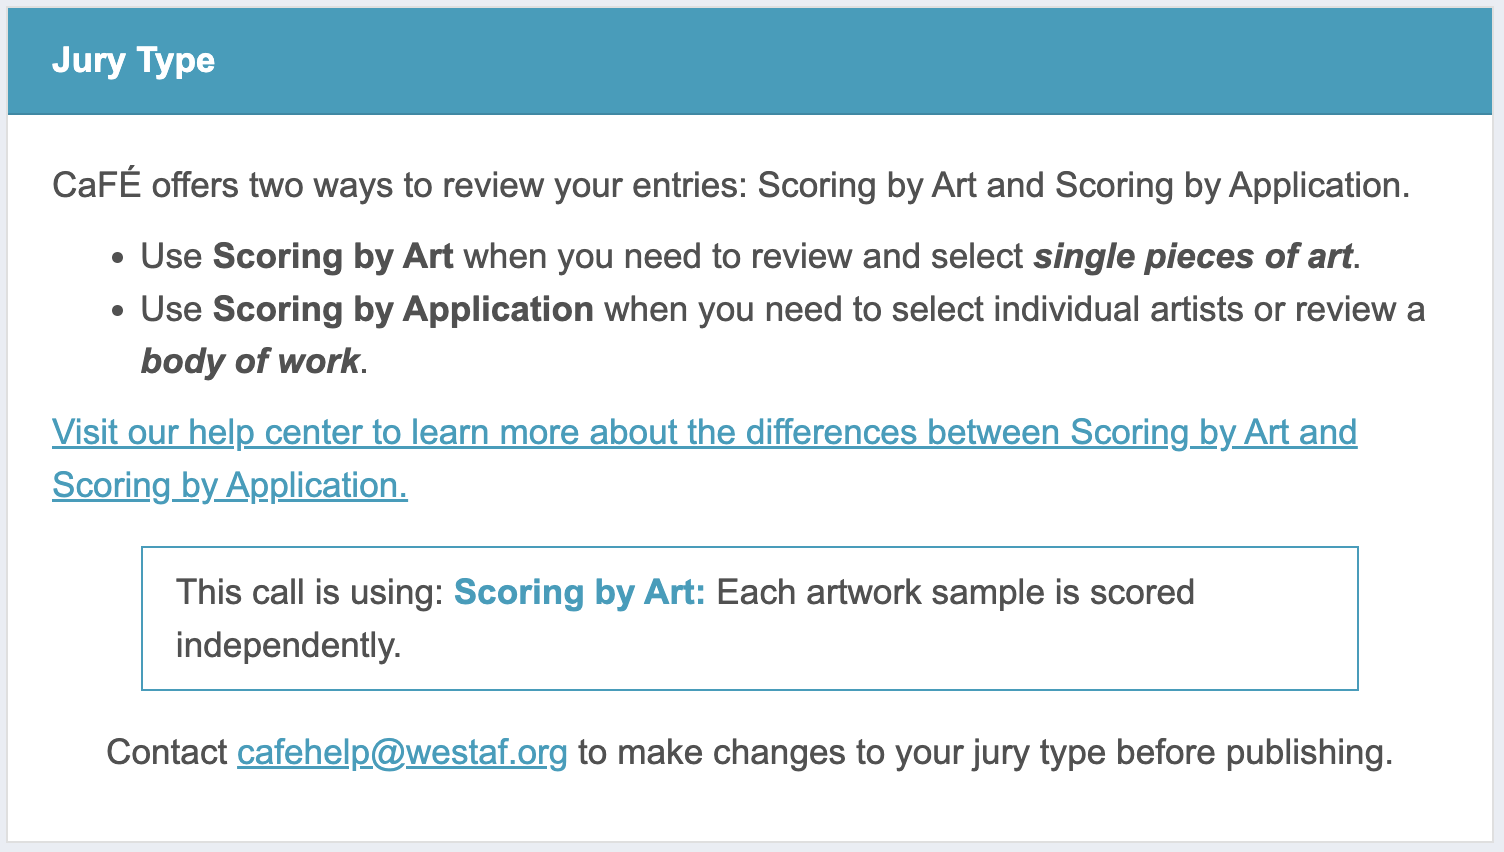 Screenshot of the Jury Type area where admins can confirm the details.